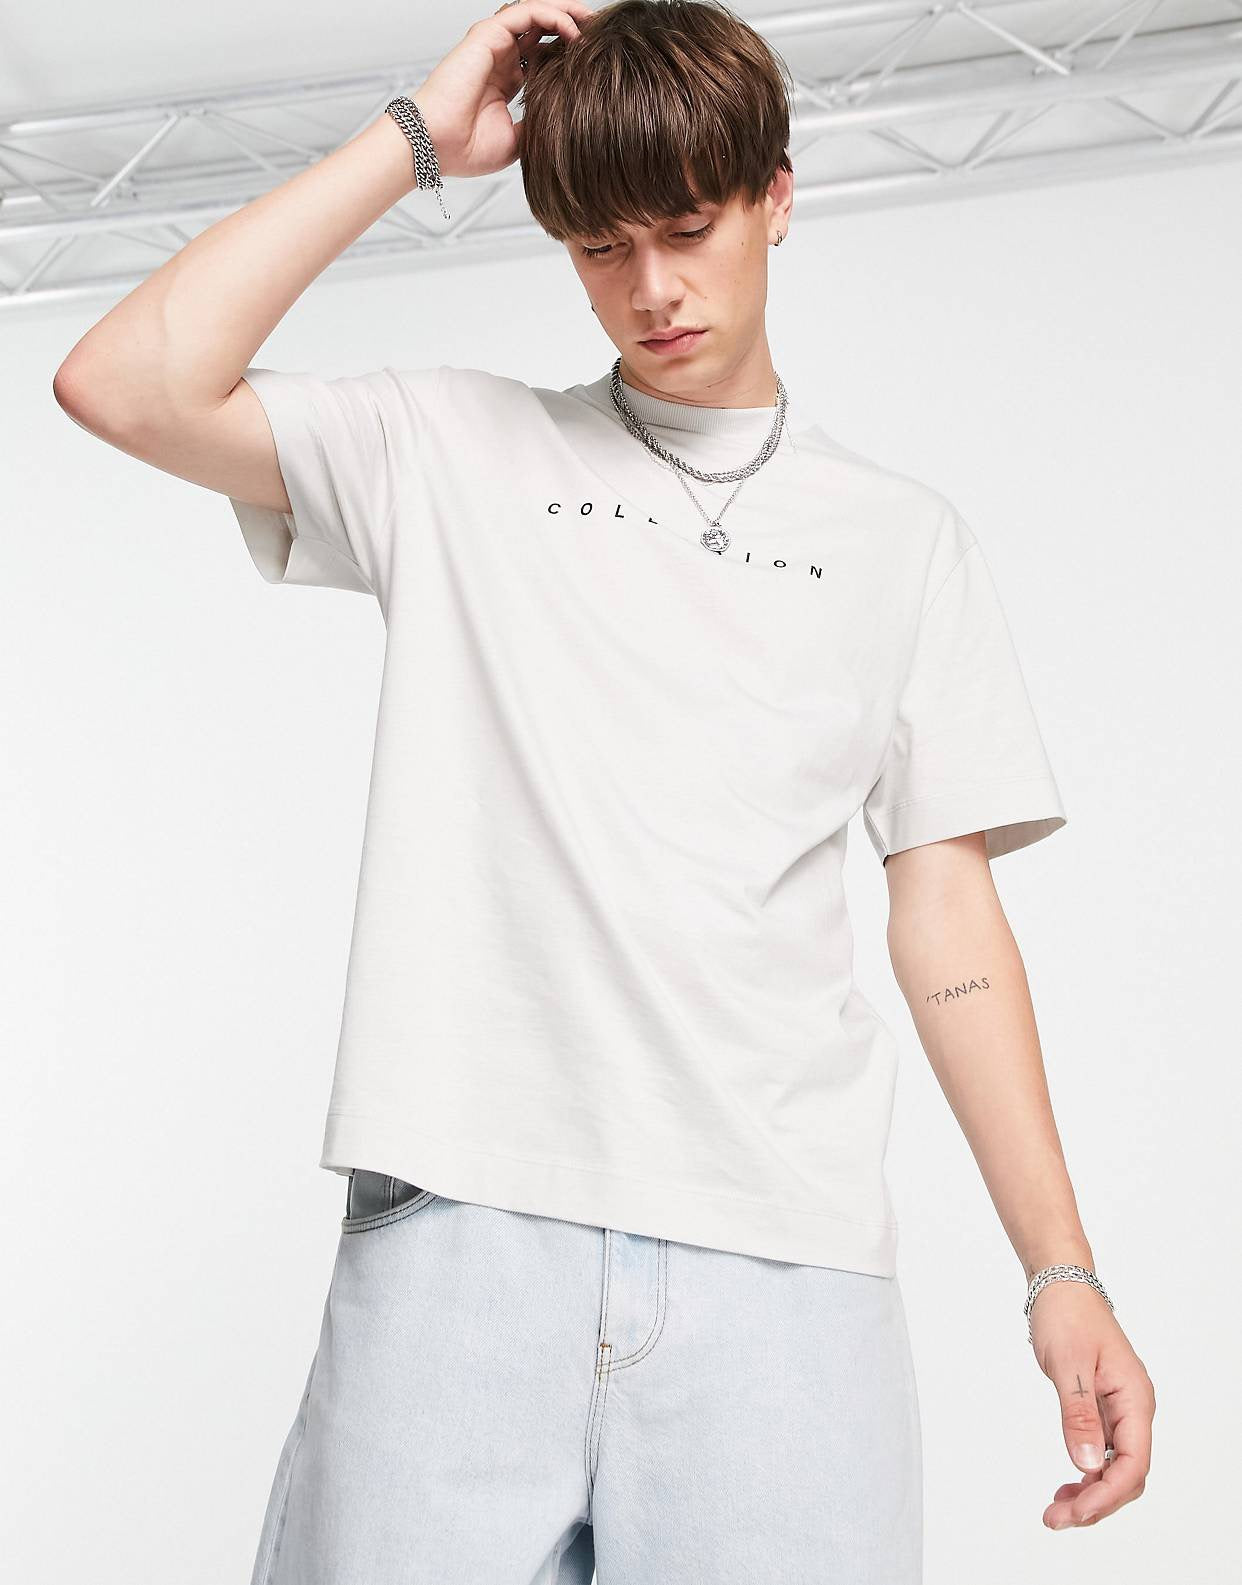 COLLUSION logo t-shirt in light grey